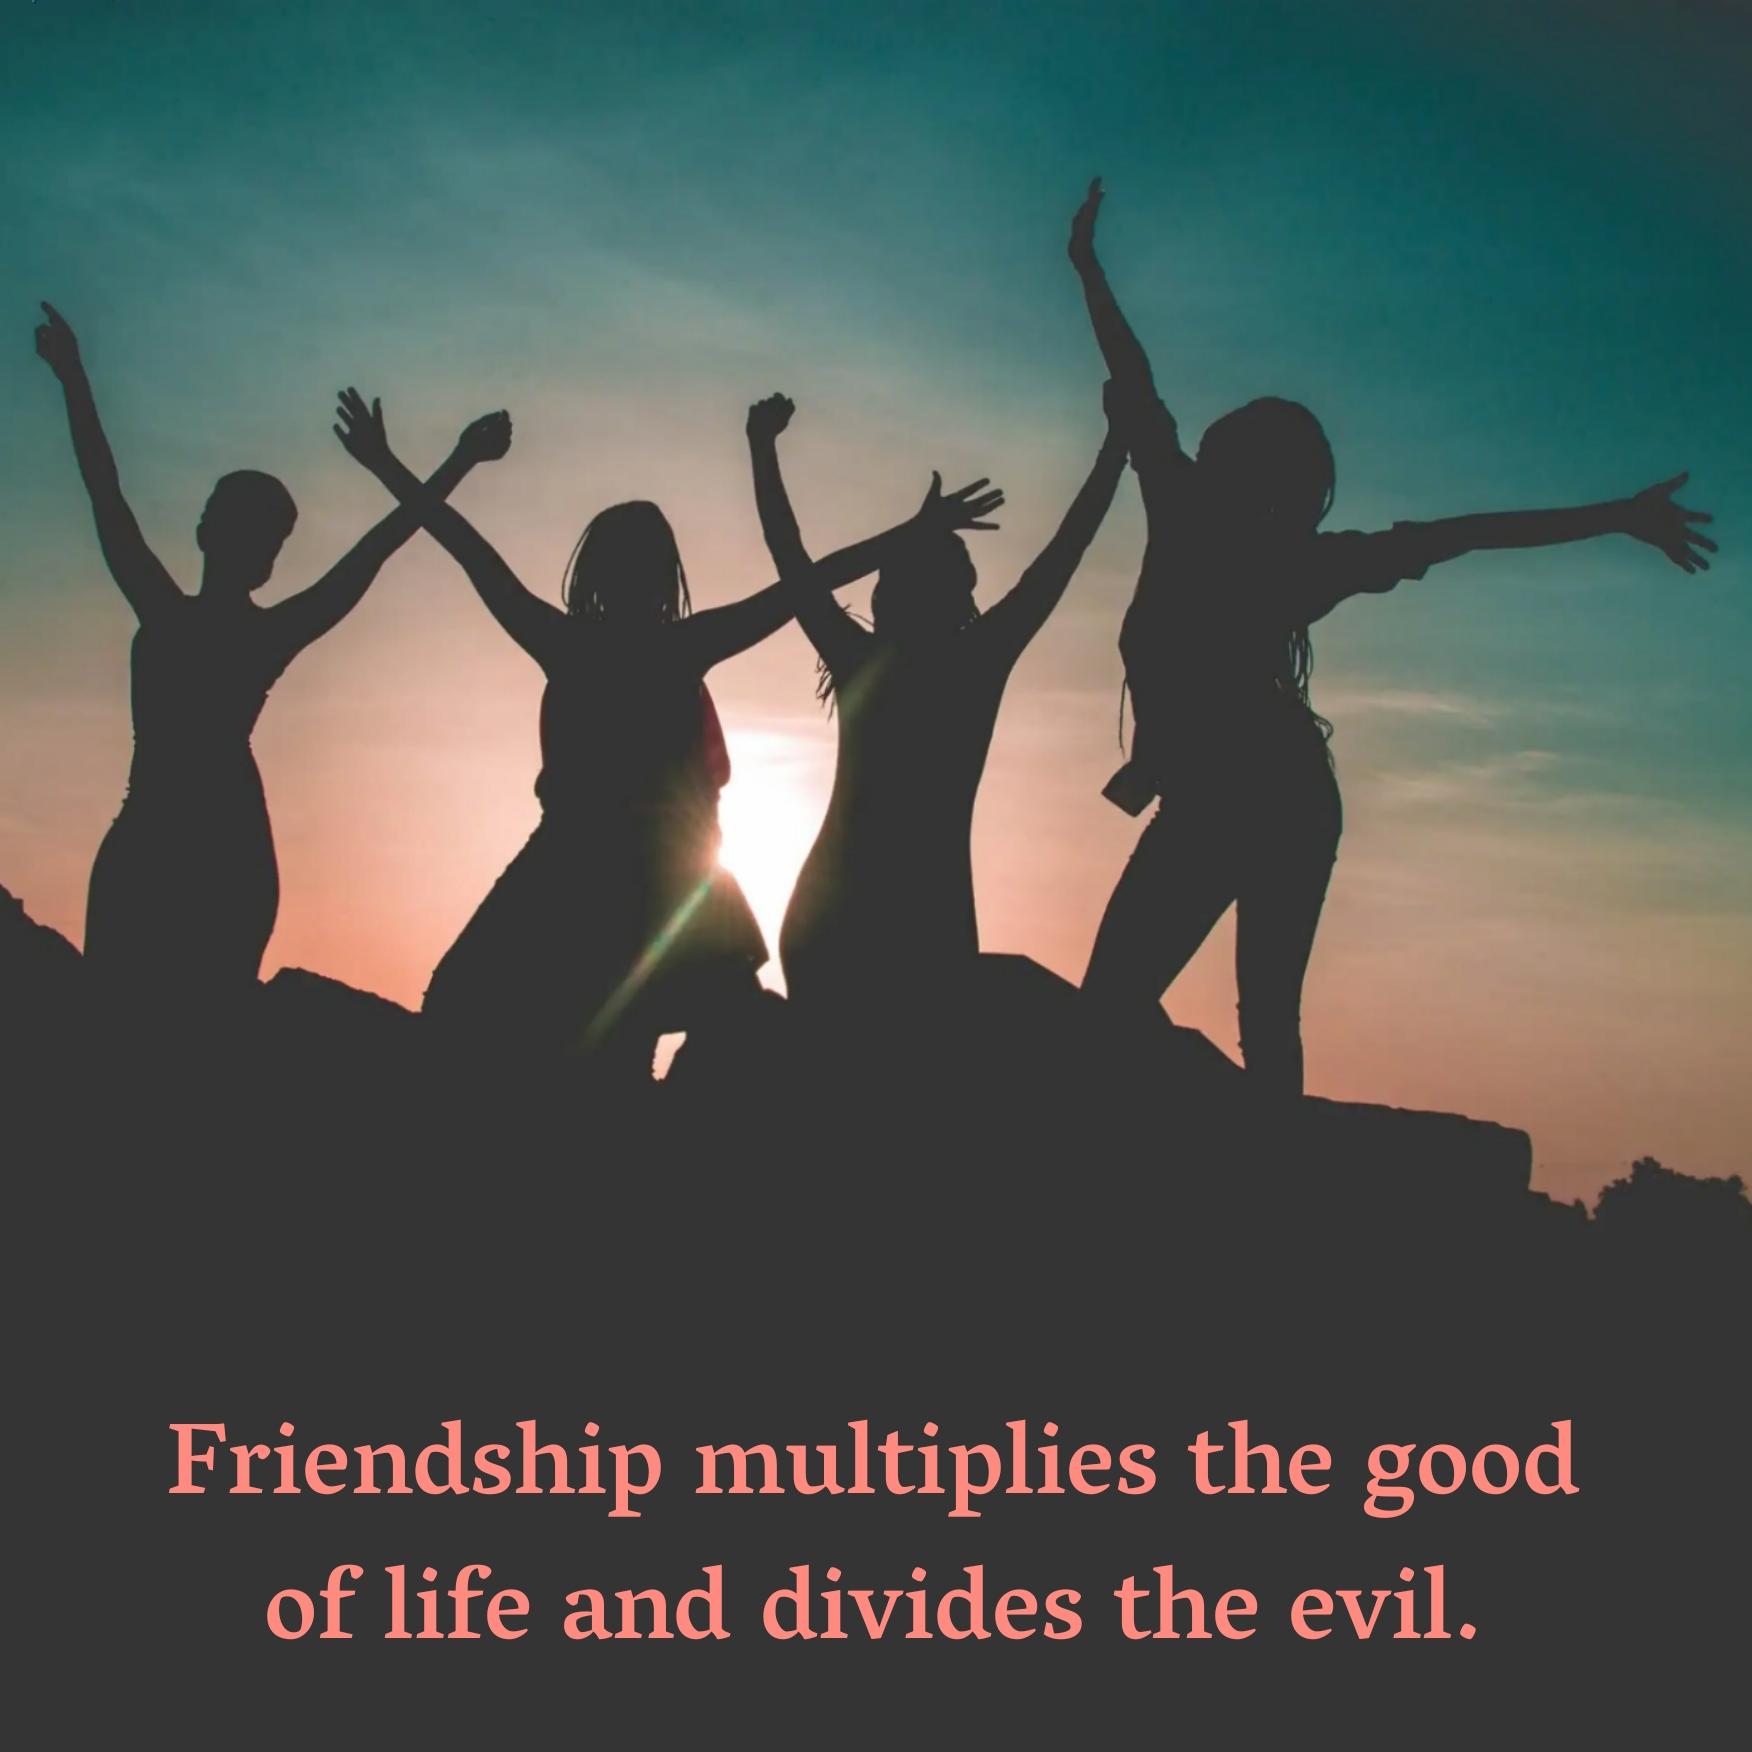 Friendship multiplies the good of life and divides the evil